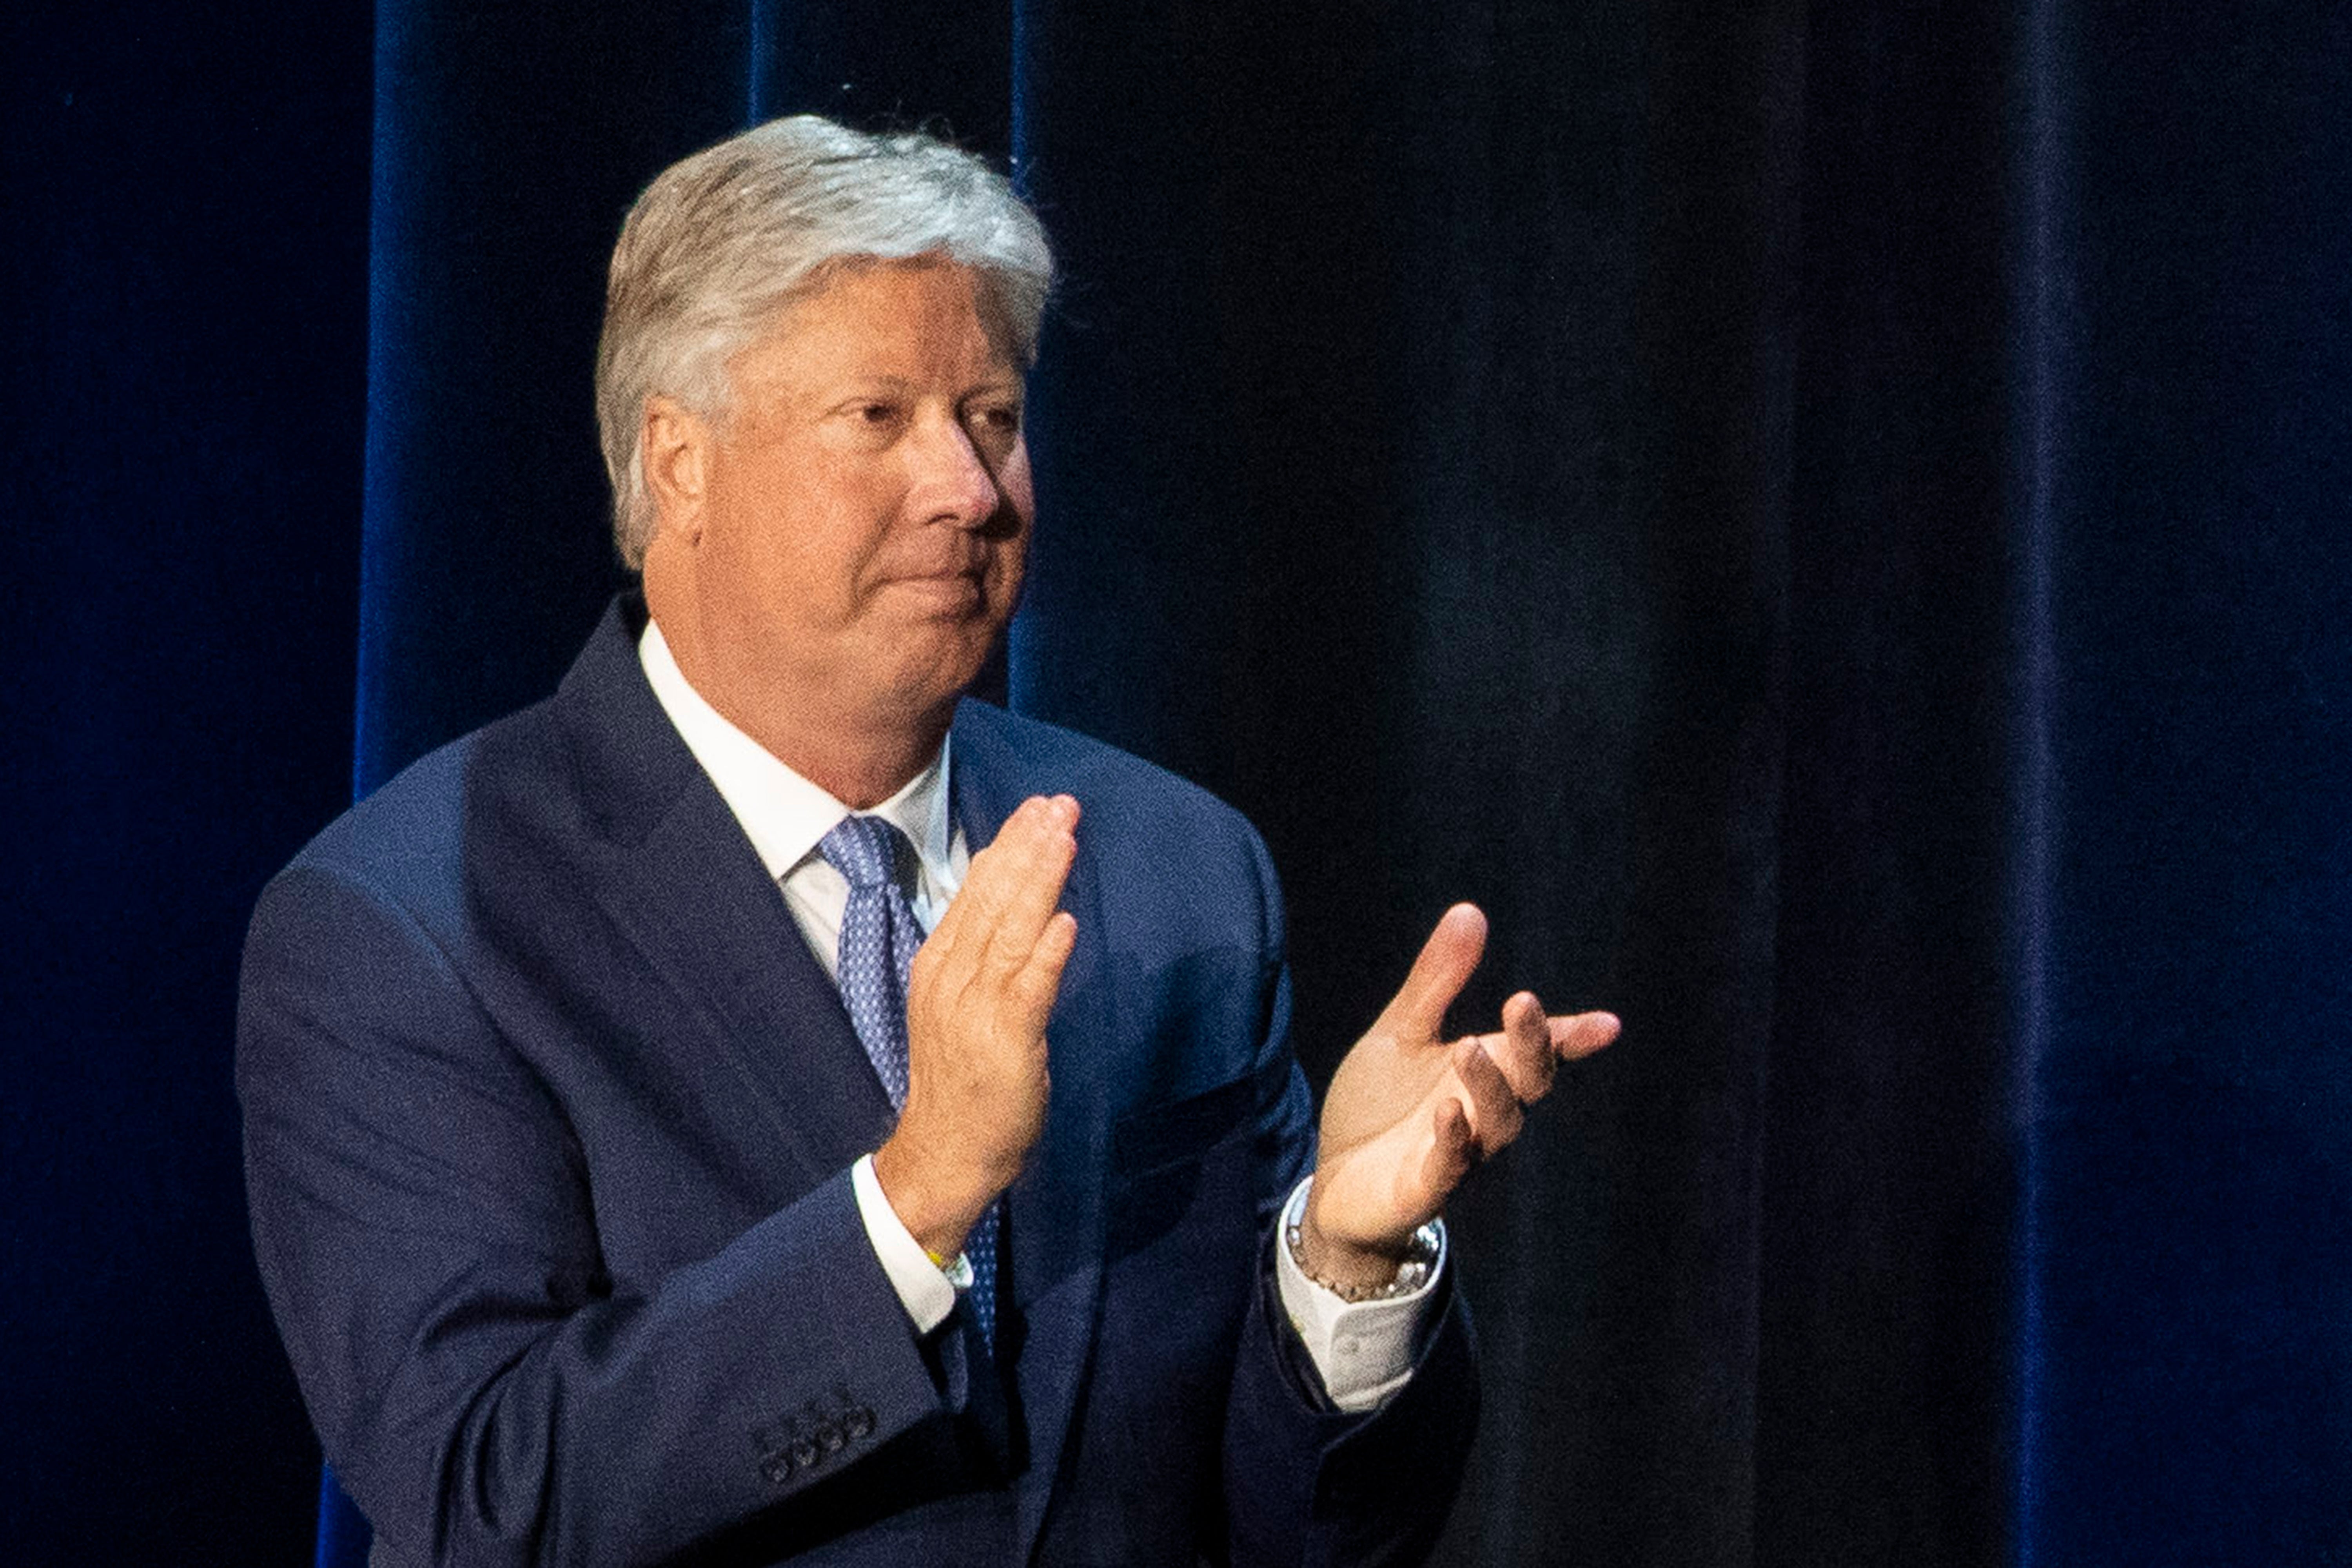 Gateway Church's board of elders said in a statement, released Tuesday, that they will accept the resignation of senior pastor Robert Morris.